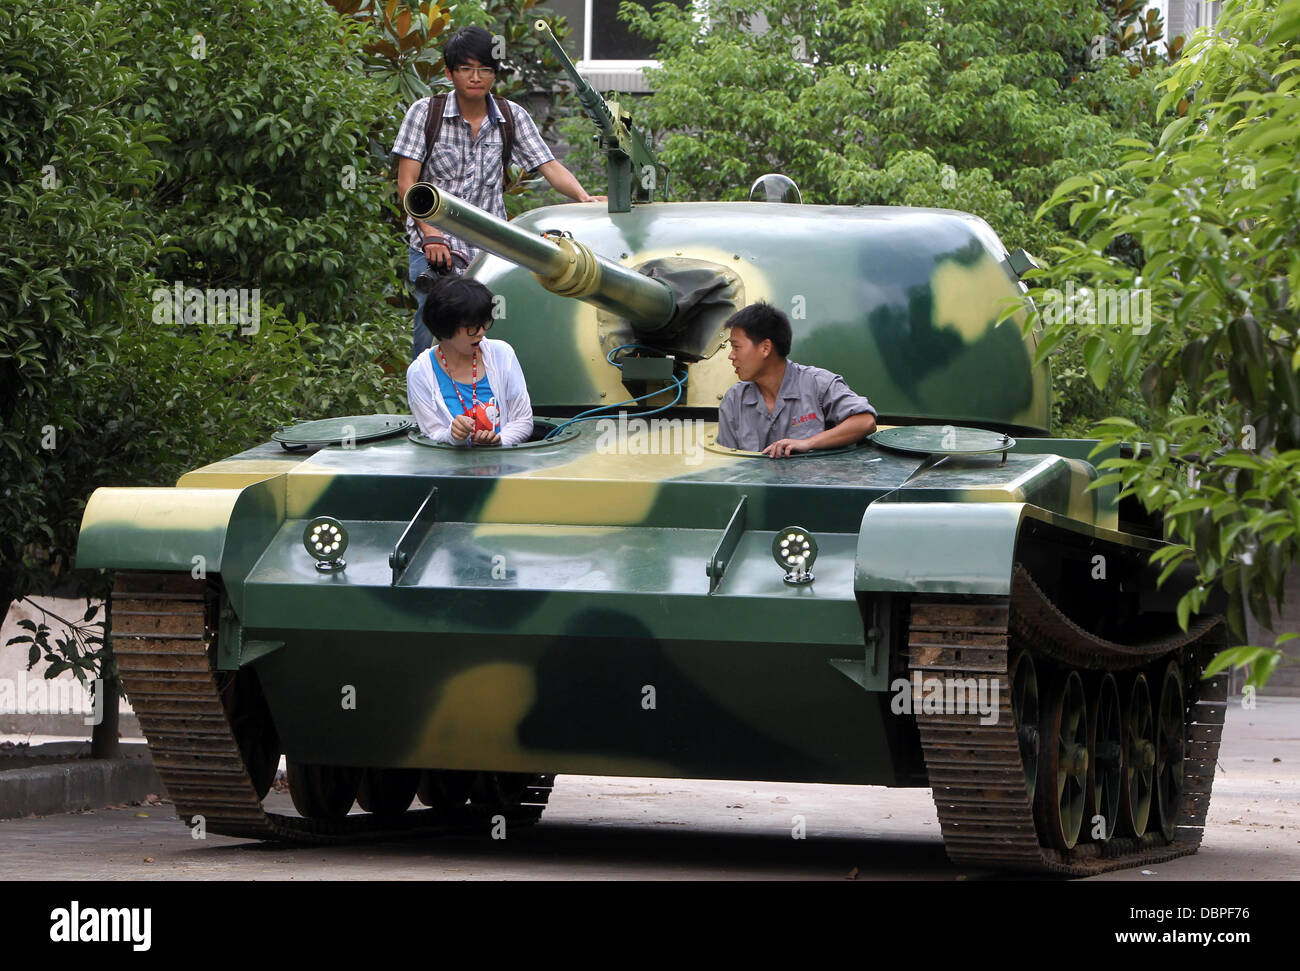 HOMEMADE TANK TAKES TO THE STREETS Residents of Hangzhou, China, may ...